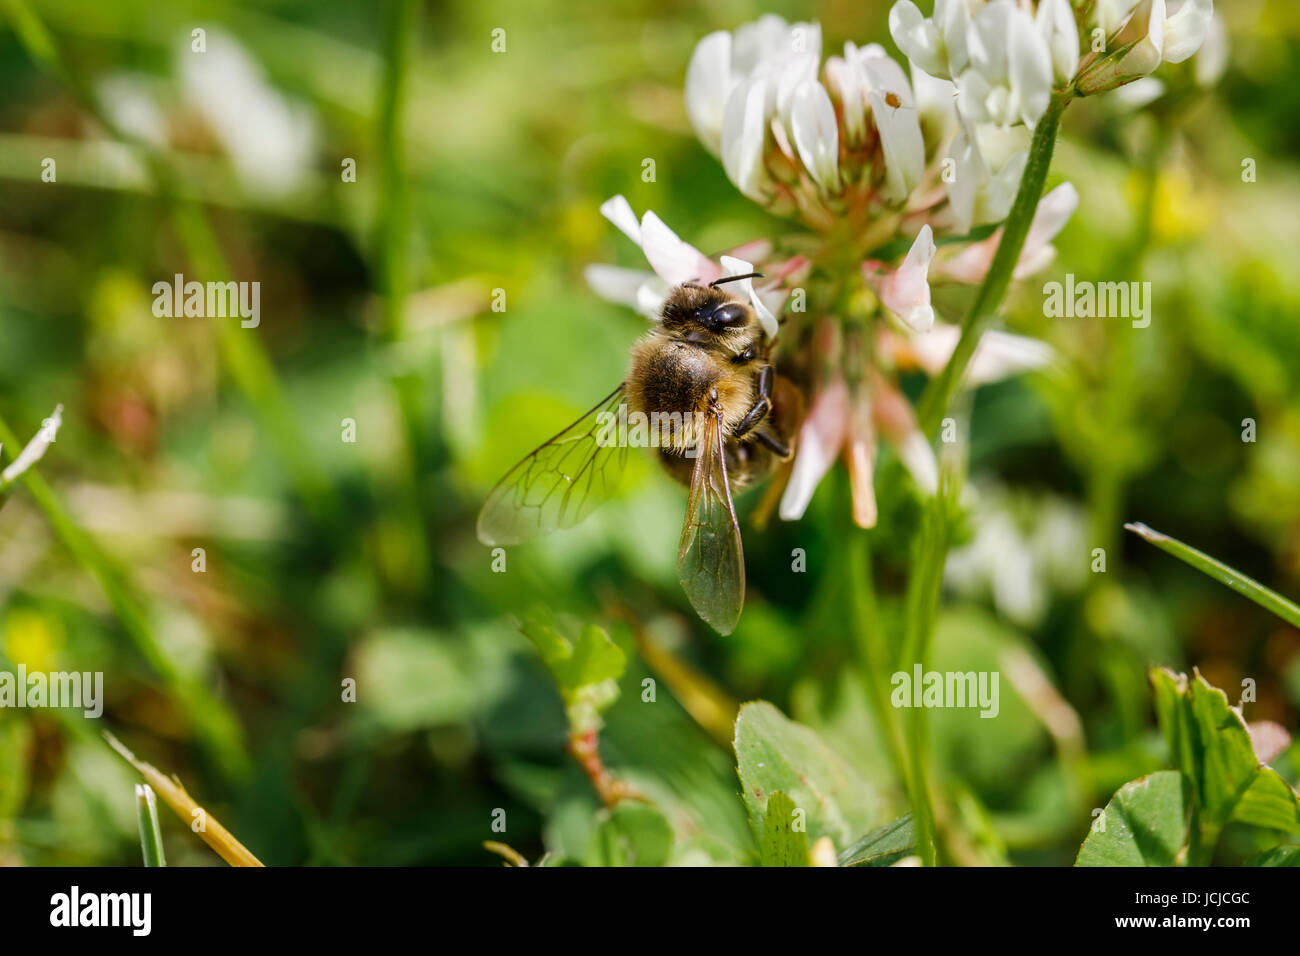 Western honey bee or European honey bee (Apis mellifera) collects nectar from and pollinates clover in early summer in southeast England, UK Stock Photo